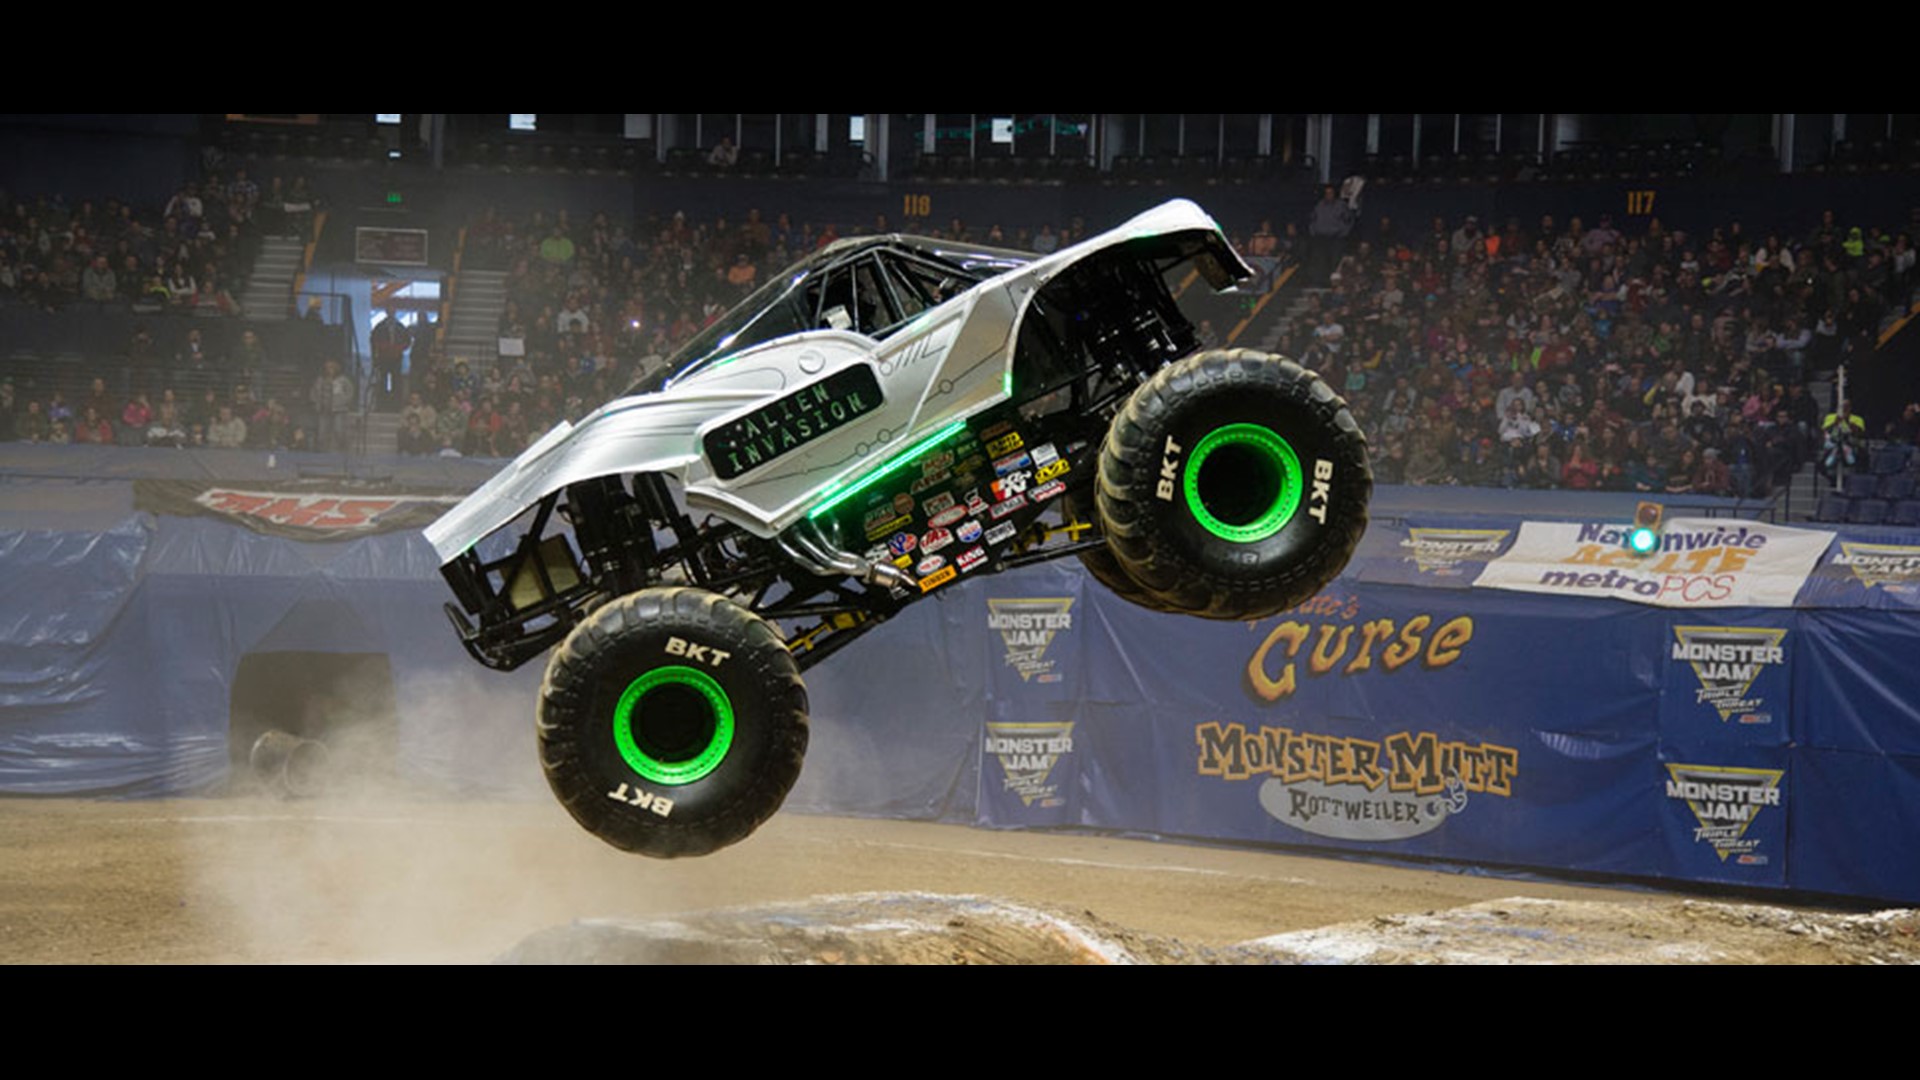 Monster Jam is returning to Indianapolis on June 12 and 13.